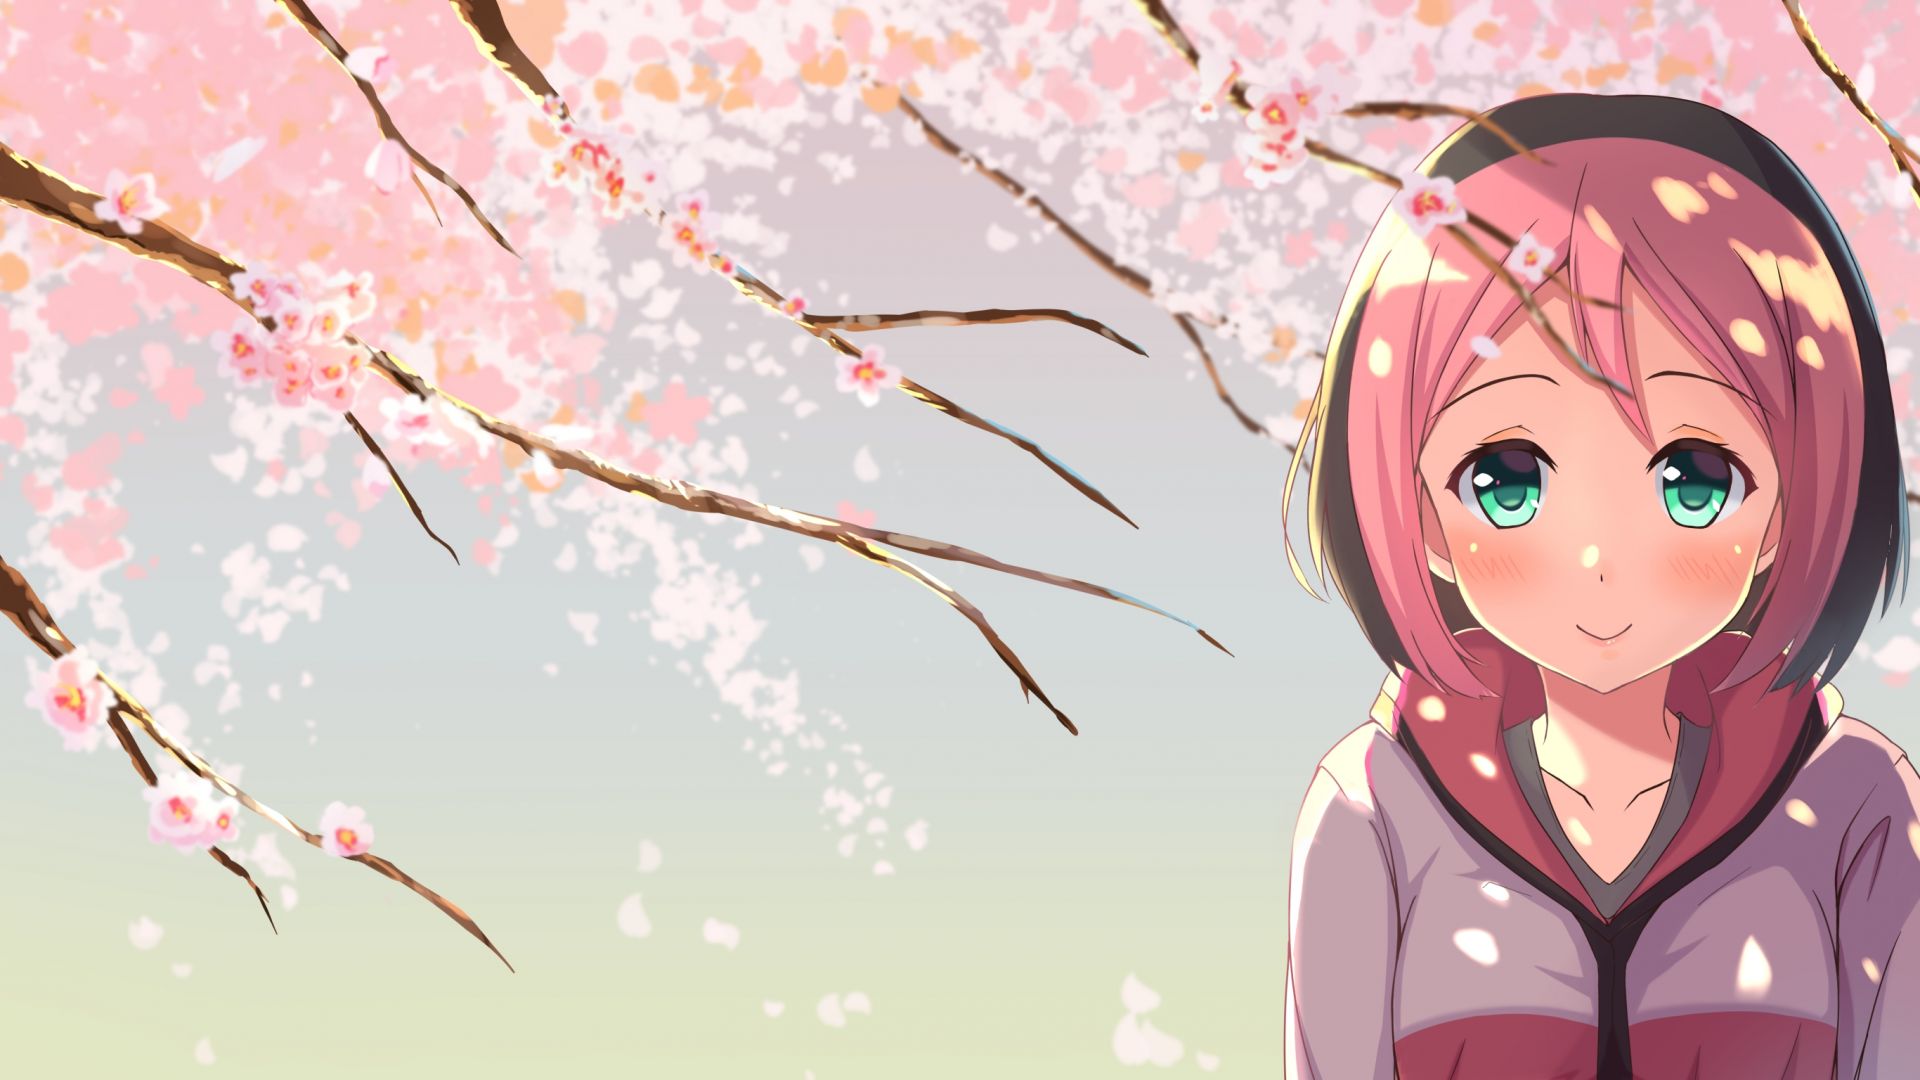 Desktop Wallpaper Osu!, Video Game, Anime, Anime Girl, HD Image, Picture, Background, 201a98